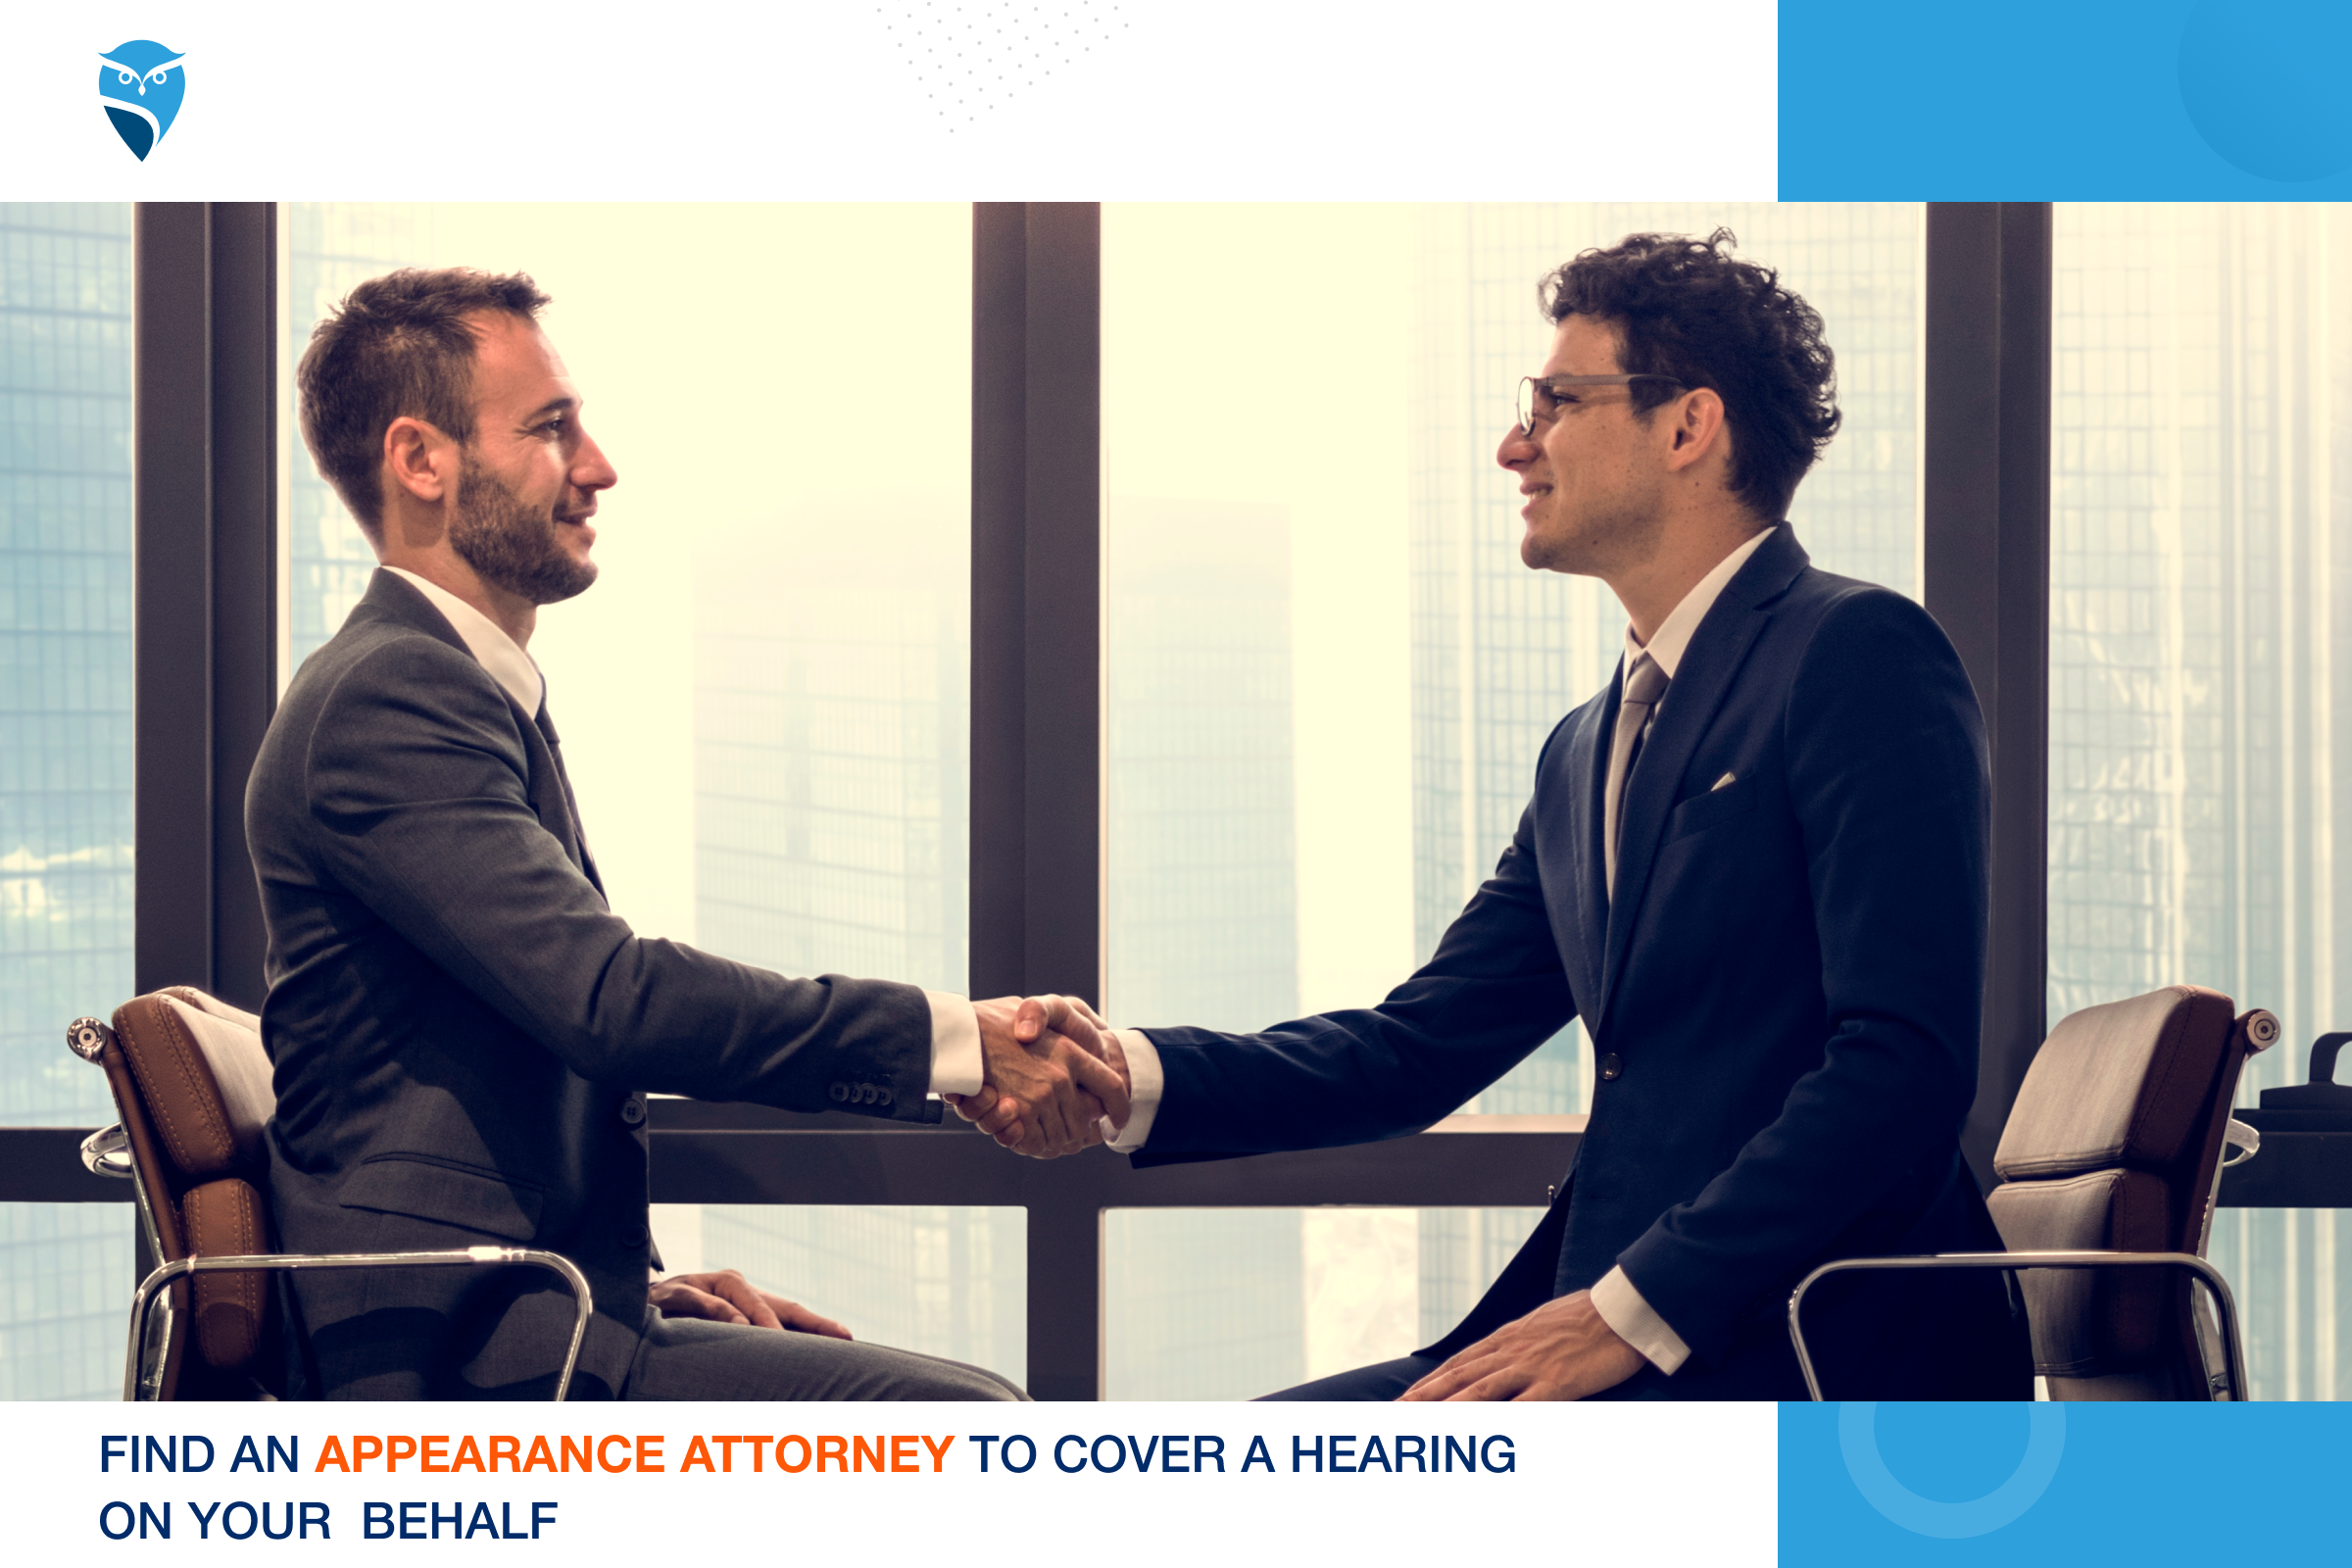 Find an Appearance Attorney to Cover a Hearing on Your Behalf